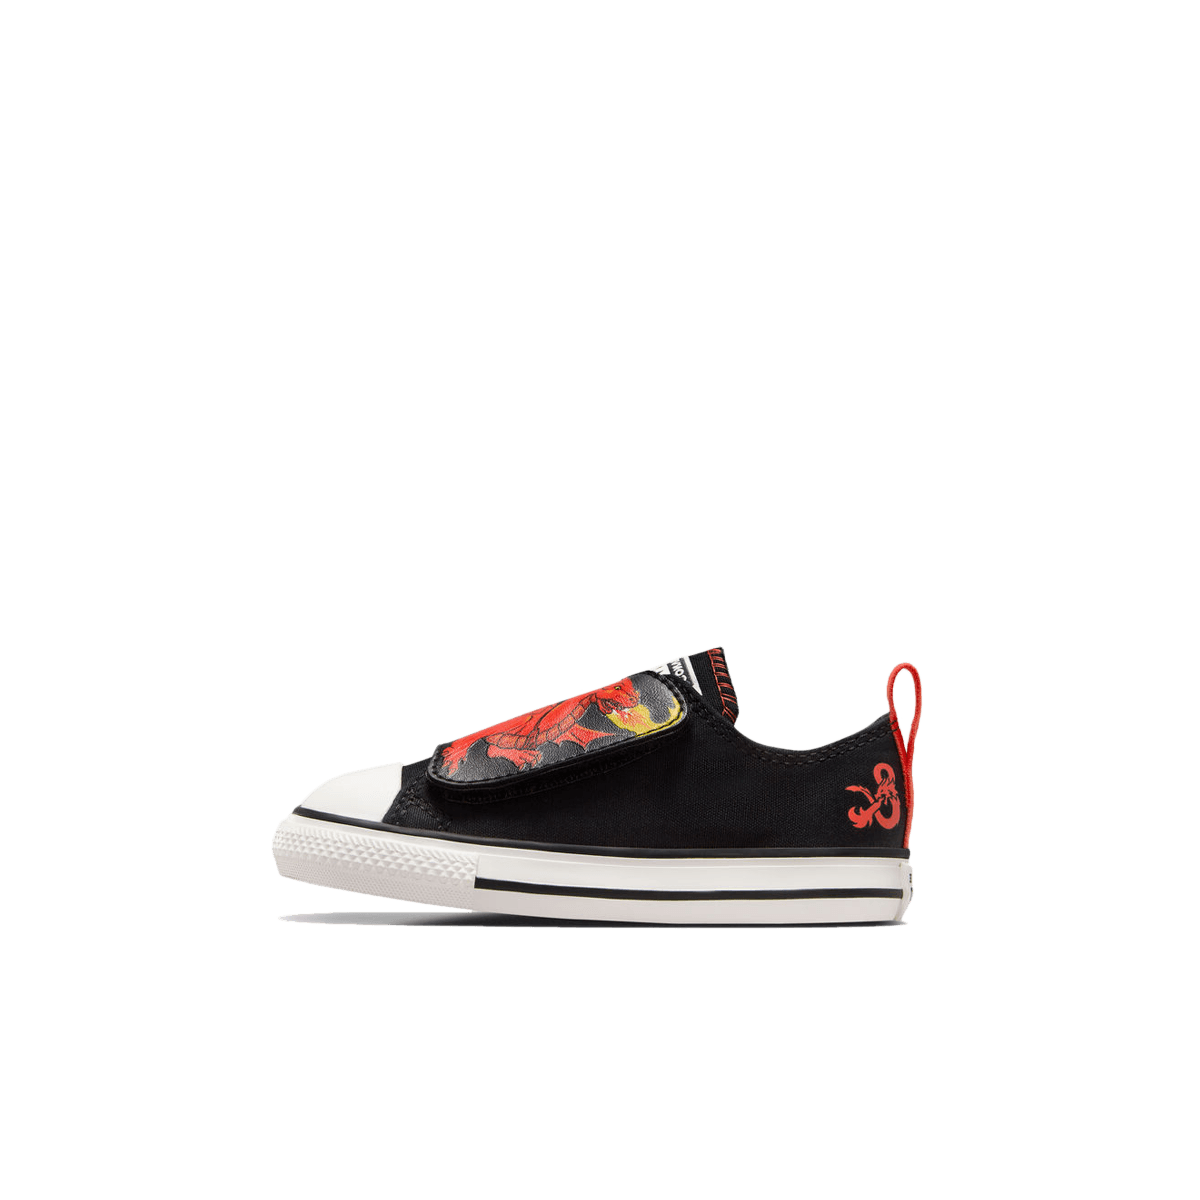 Dungeons & Dragons x Converse Chuck Taylor All Star TD 'Red Dragon'